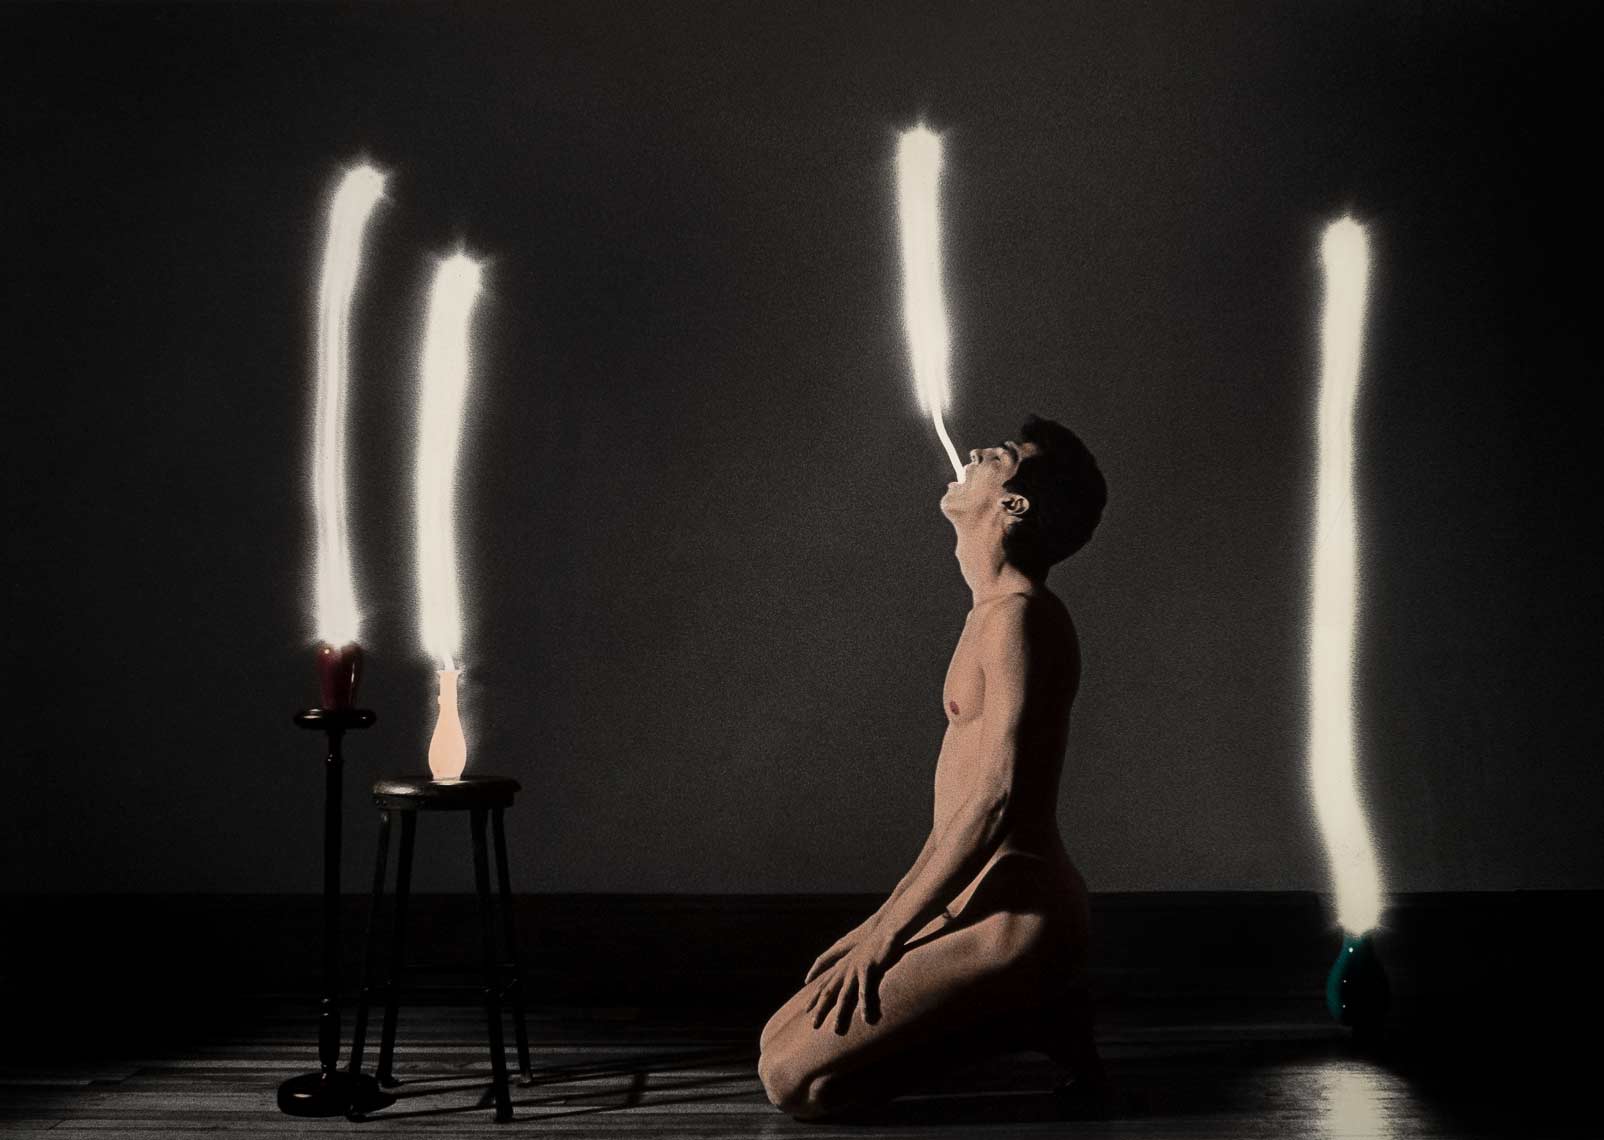 David Lebe; The Light Eater, 1983, male nude, light drawing, hand colored photograph